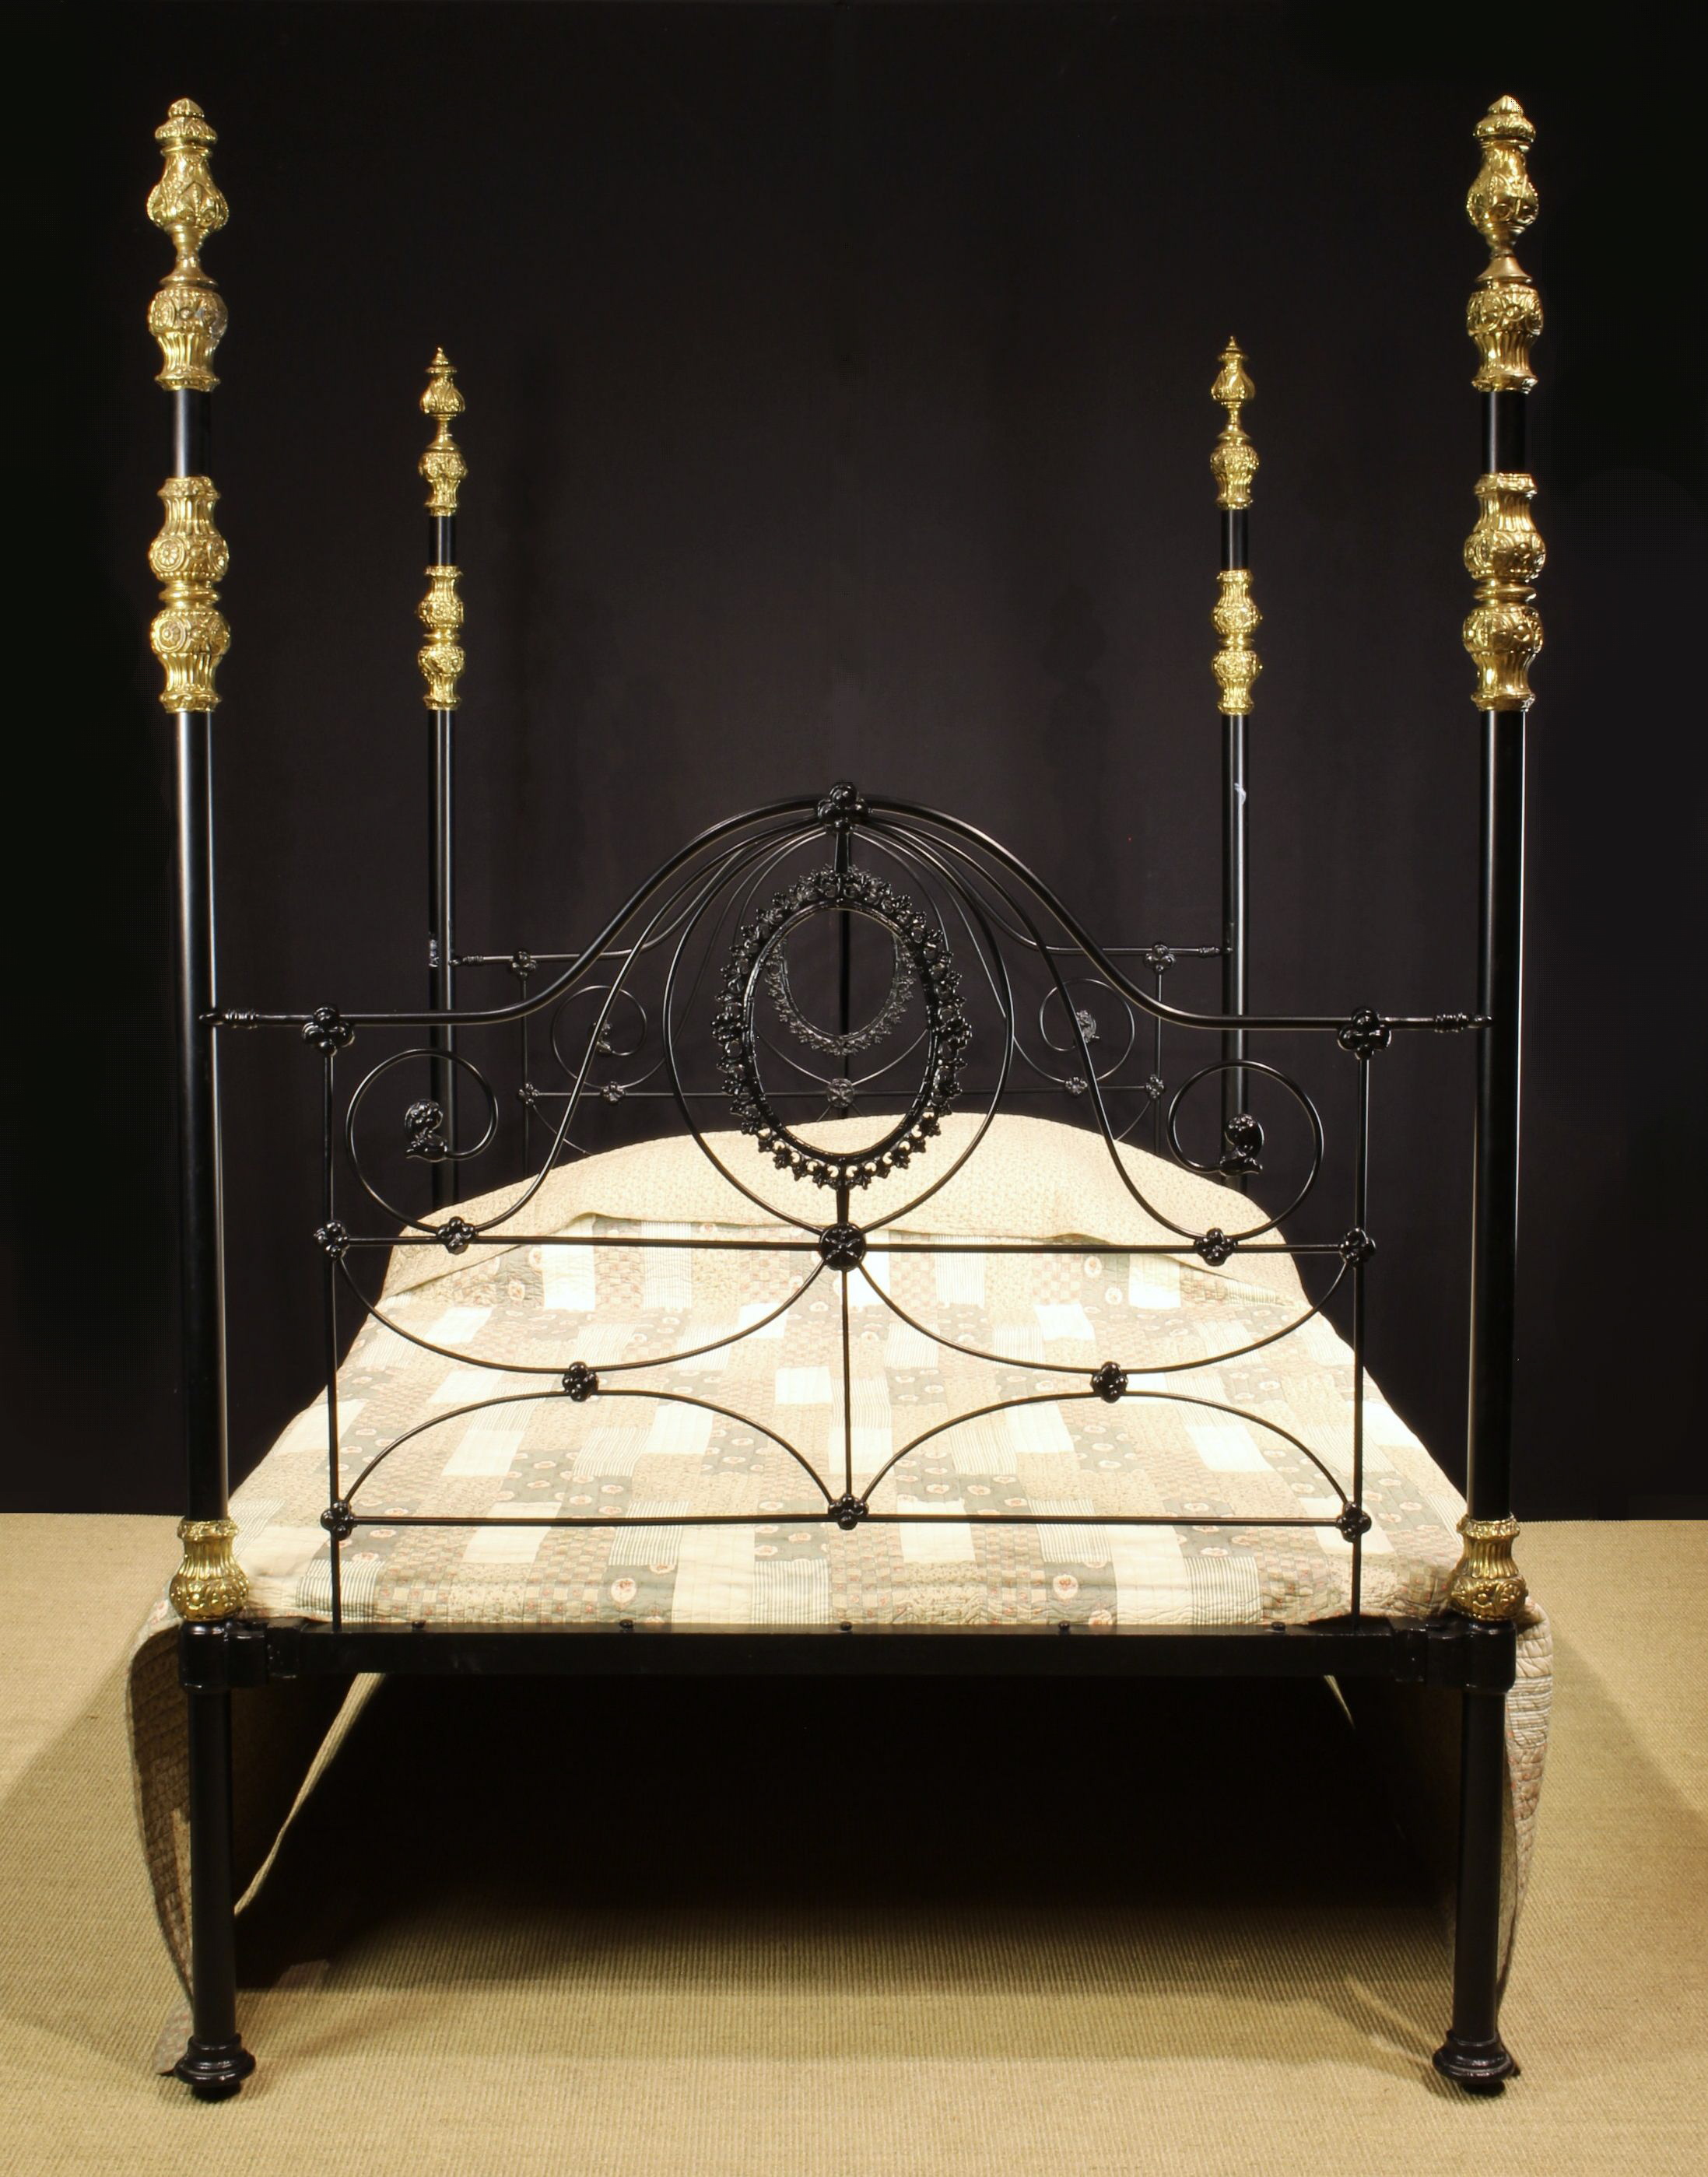 A Victorian Brass & Iron Four Poster Bed.